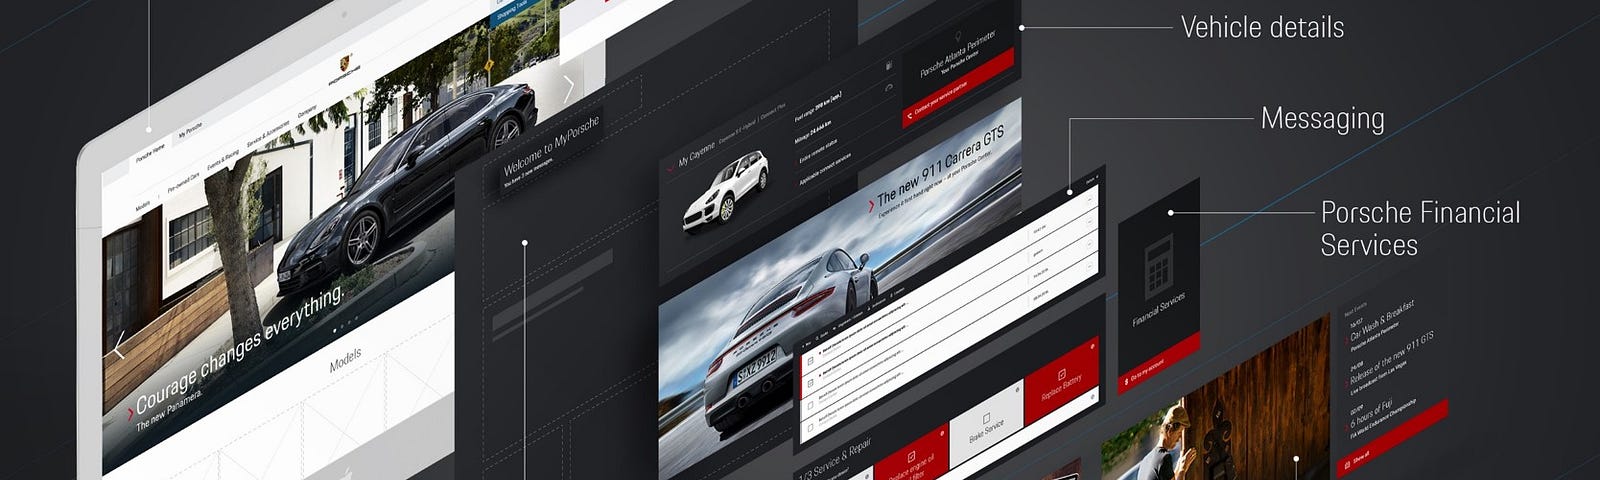 Graphic of the modular layouts of the My Porsche website with different applications